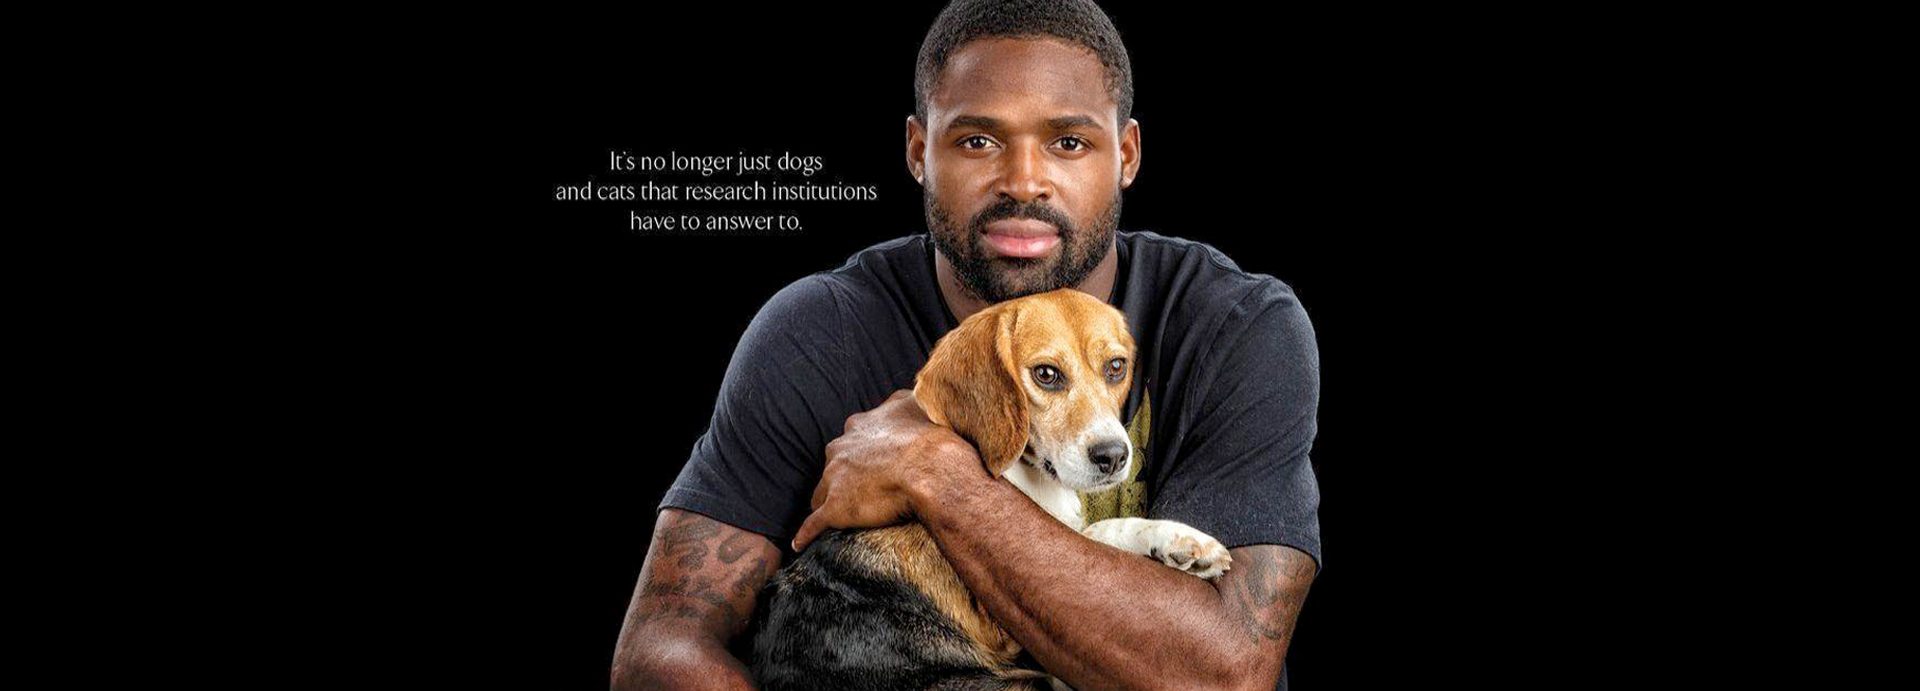 Eagles and beagles: Super Bowl champ Torrey Smith featured in billboard in support of 'Beagle Bill'